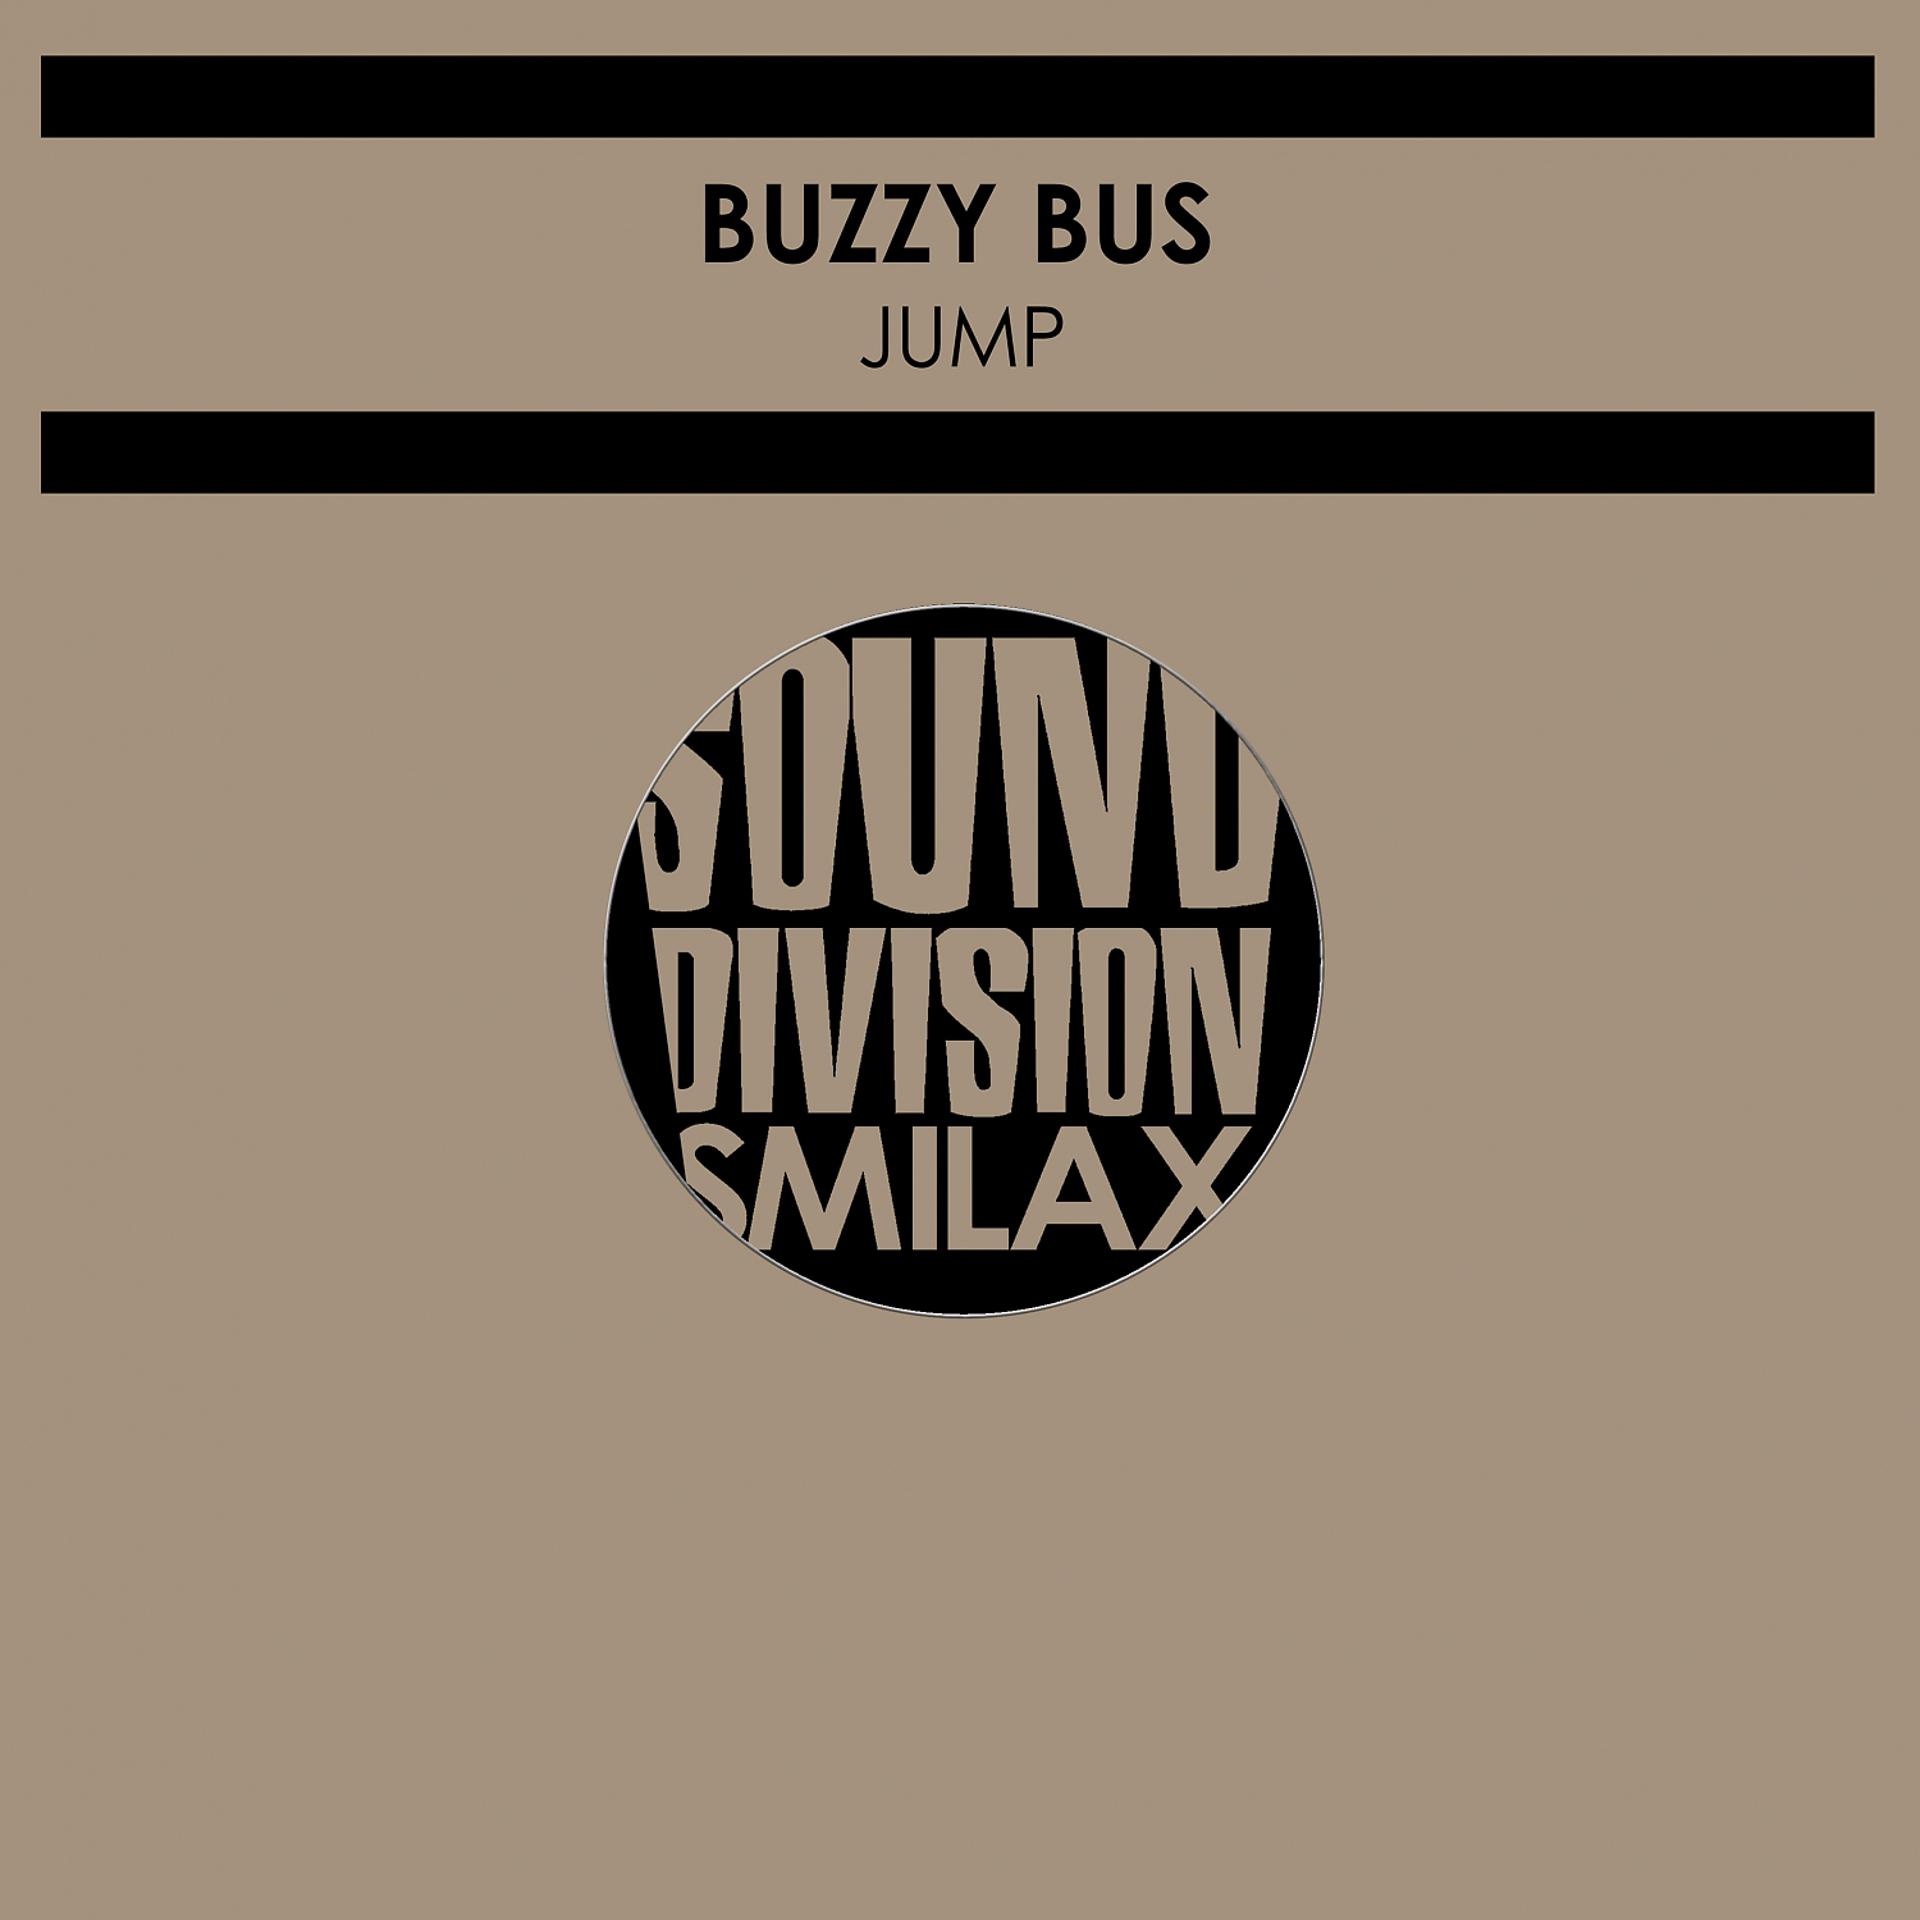 Busing песни. Lightforce take your time. Buzzy Bus - you don't stop poster.